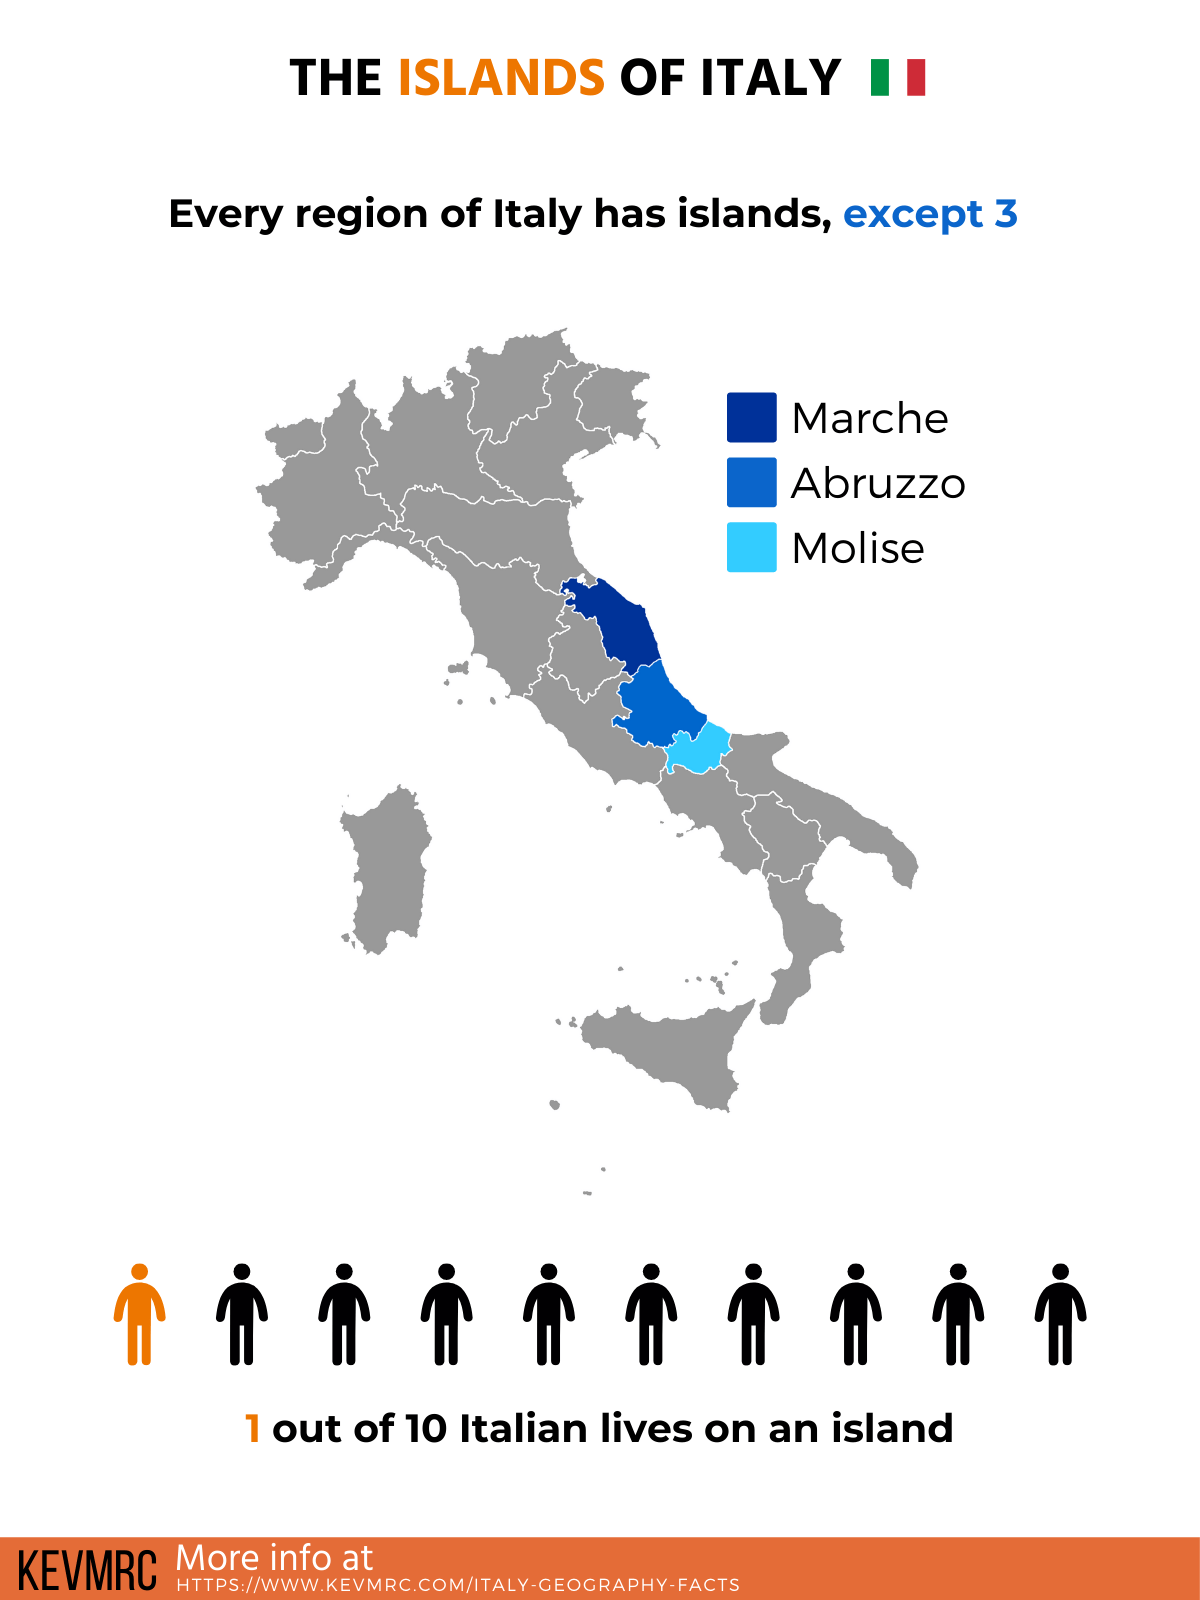 illustration about the islands of italy